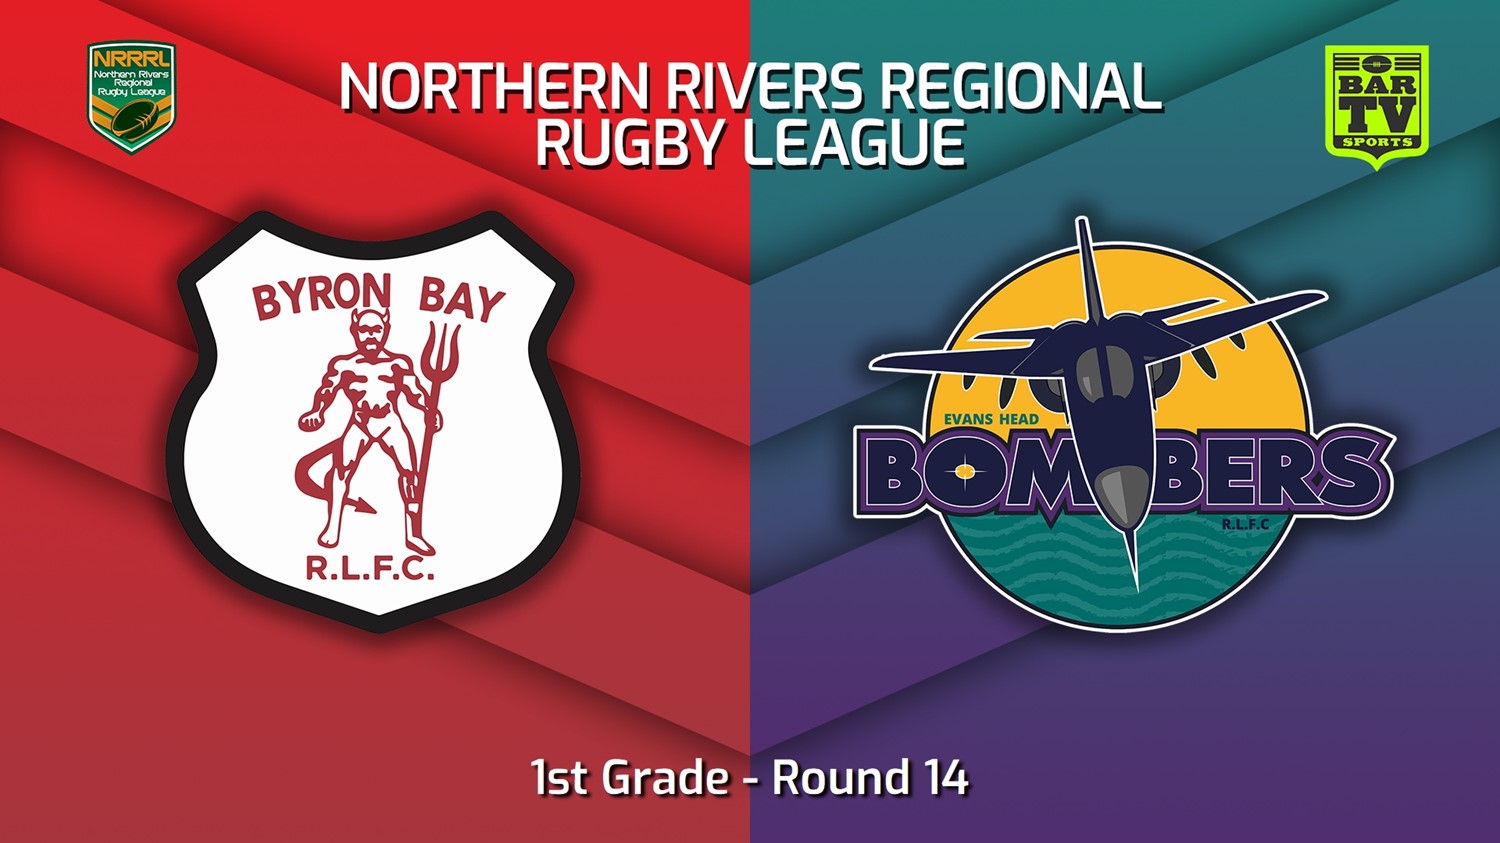 230730-Northern Rivers Round 14 - 1st Grade - Byron Bay Red Devils v Evans Head Bombers Slate Image